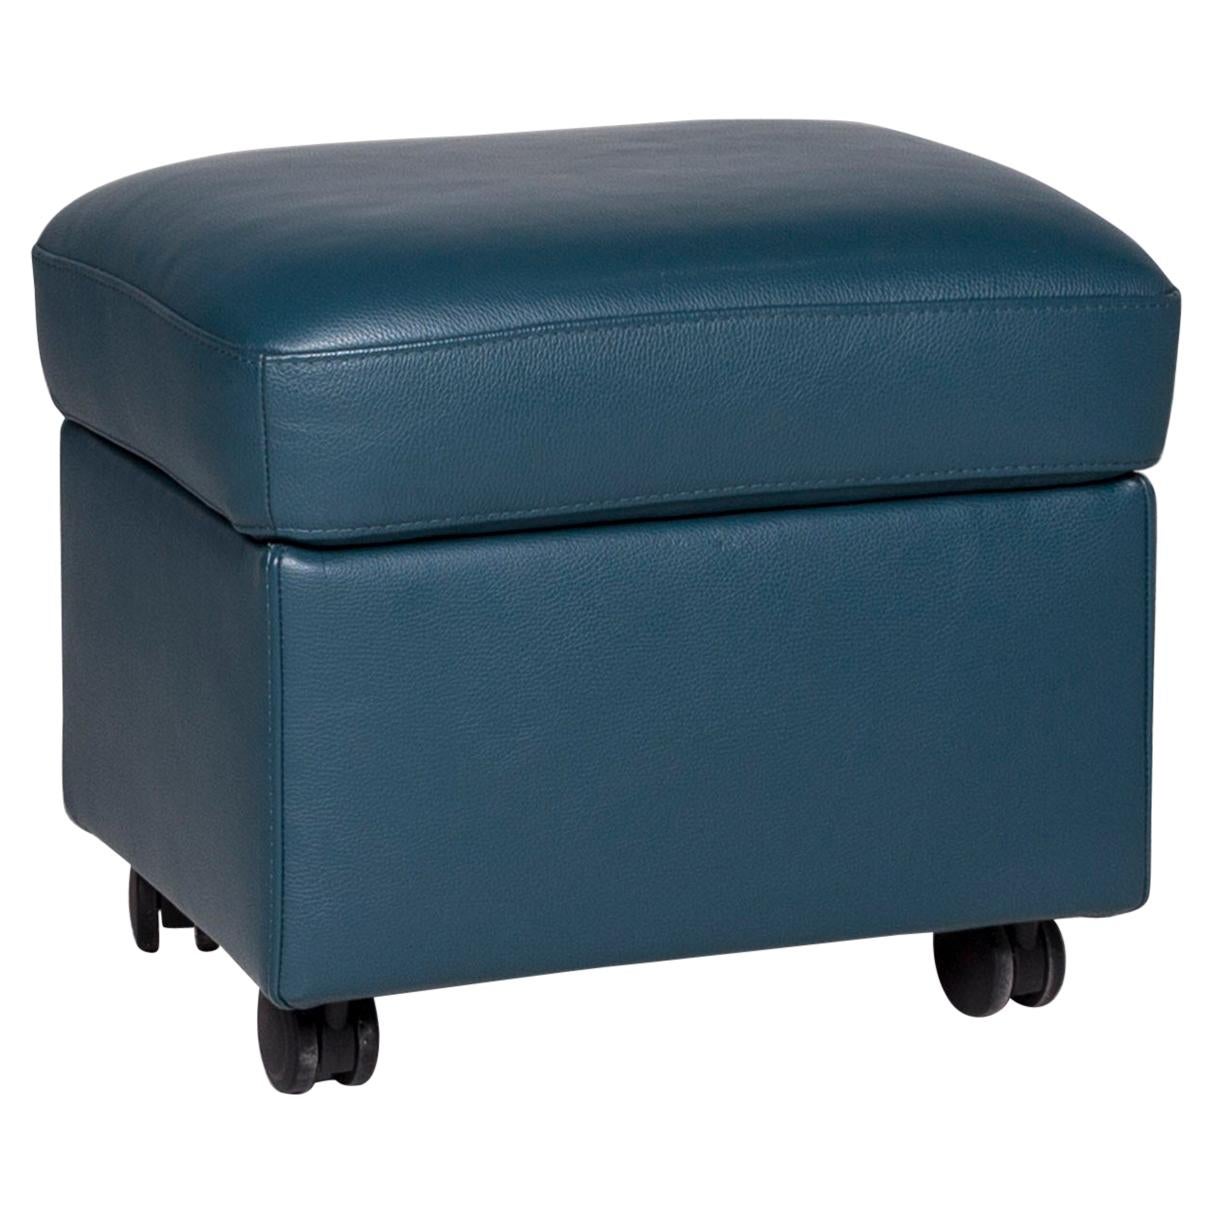 Stressless Leather Stool Blue Petrol Stool For Sale